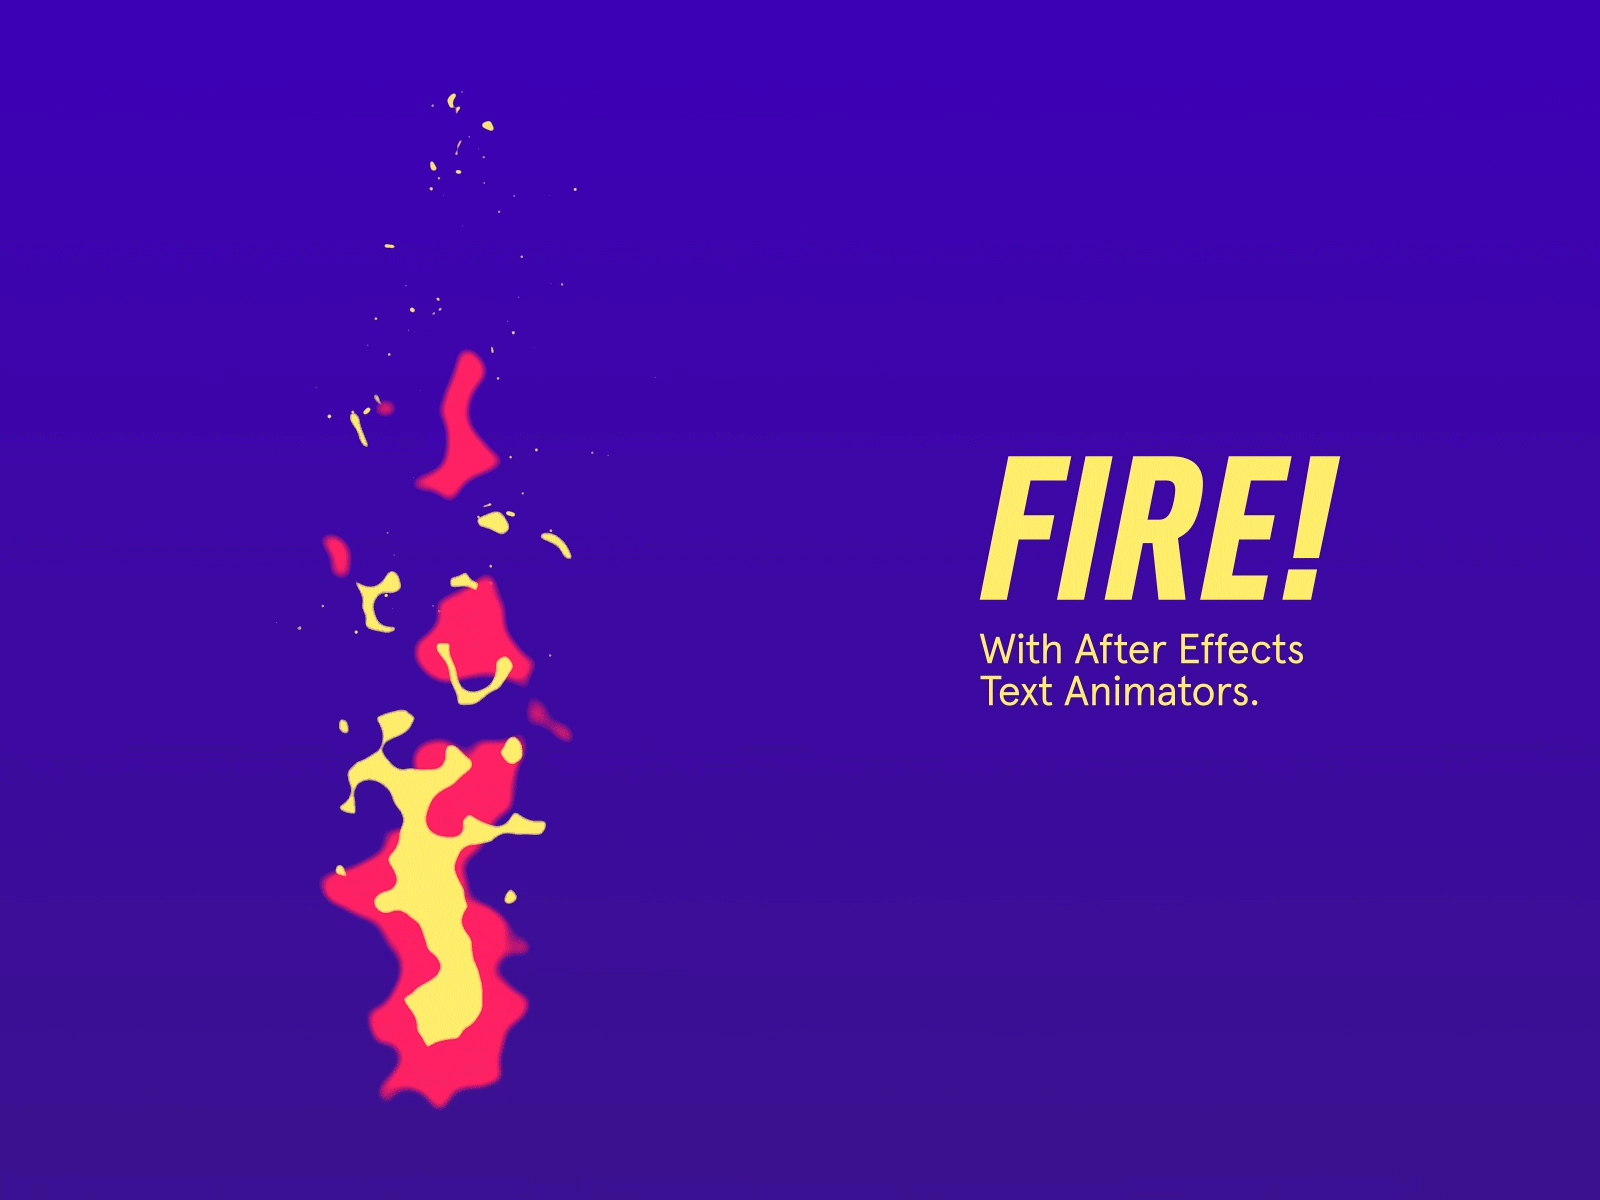 Fire! Using After Effects Text Animators 2d aae adobe after effects aftereffects animation animation 2d breakdown design fire flame illustration protip text text animations text animators textanimator tip trick tutorial